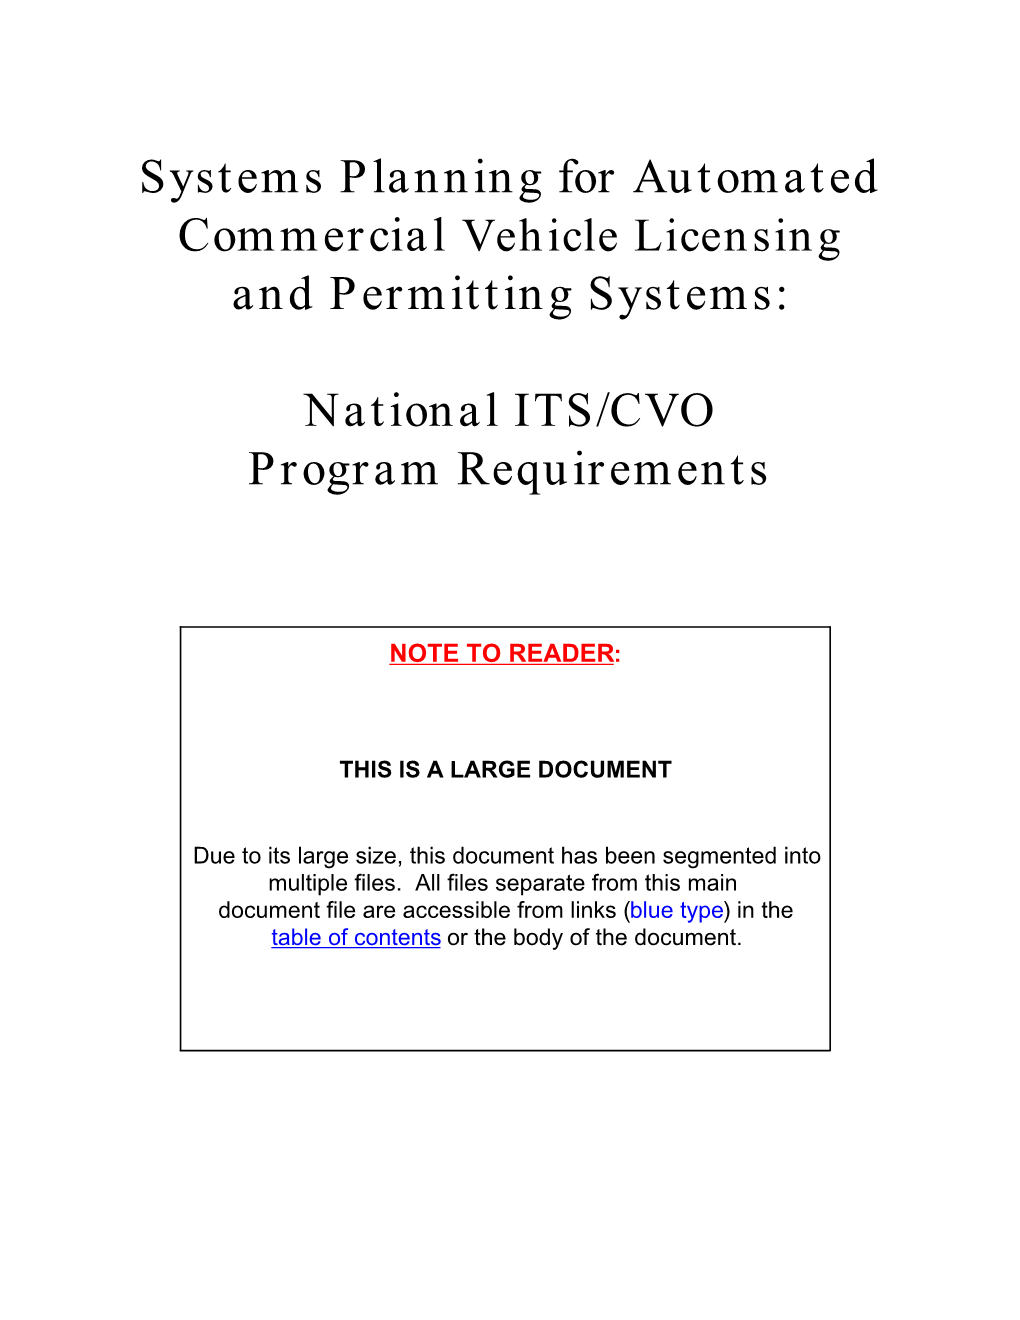 Systems Planning for Automated Commercial Vehicle Licensing and Permitting Systems